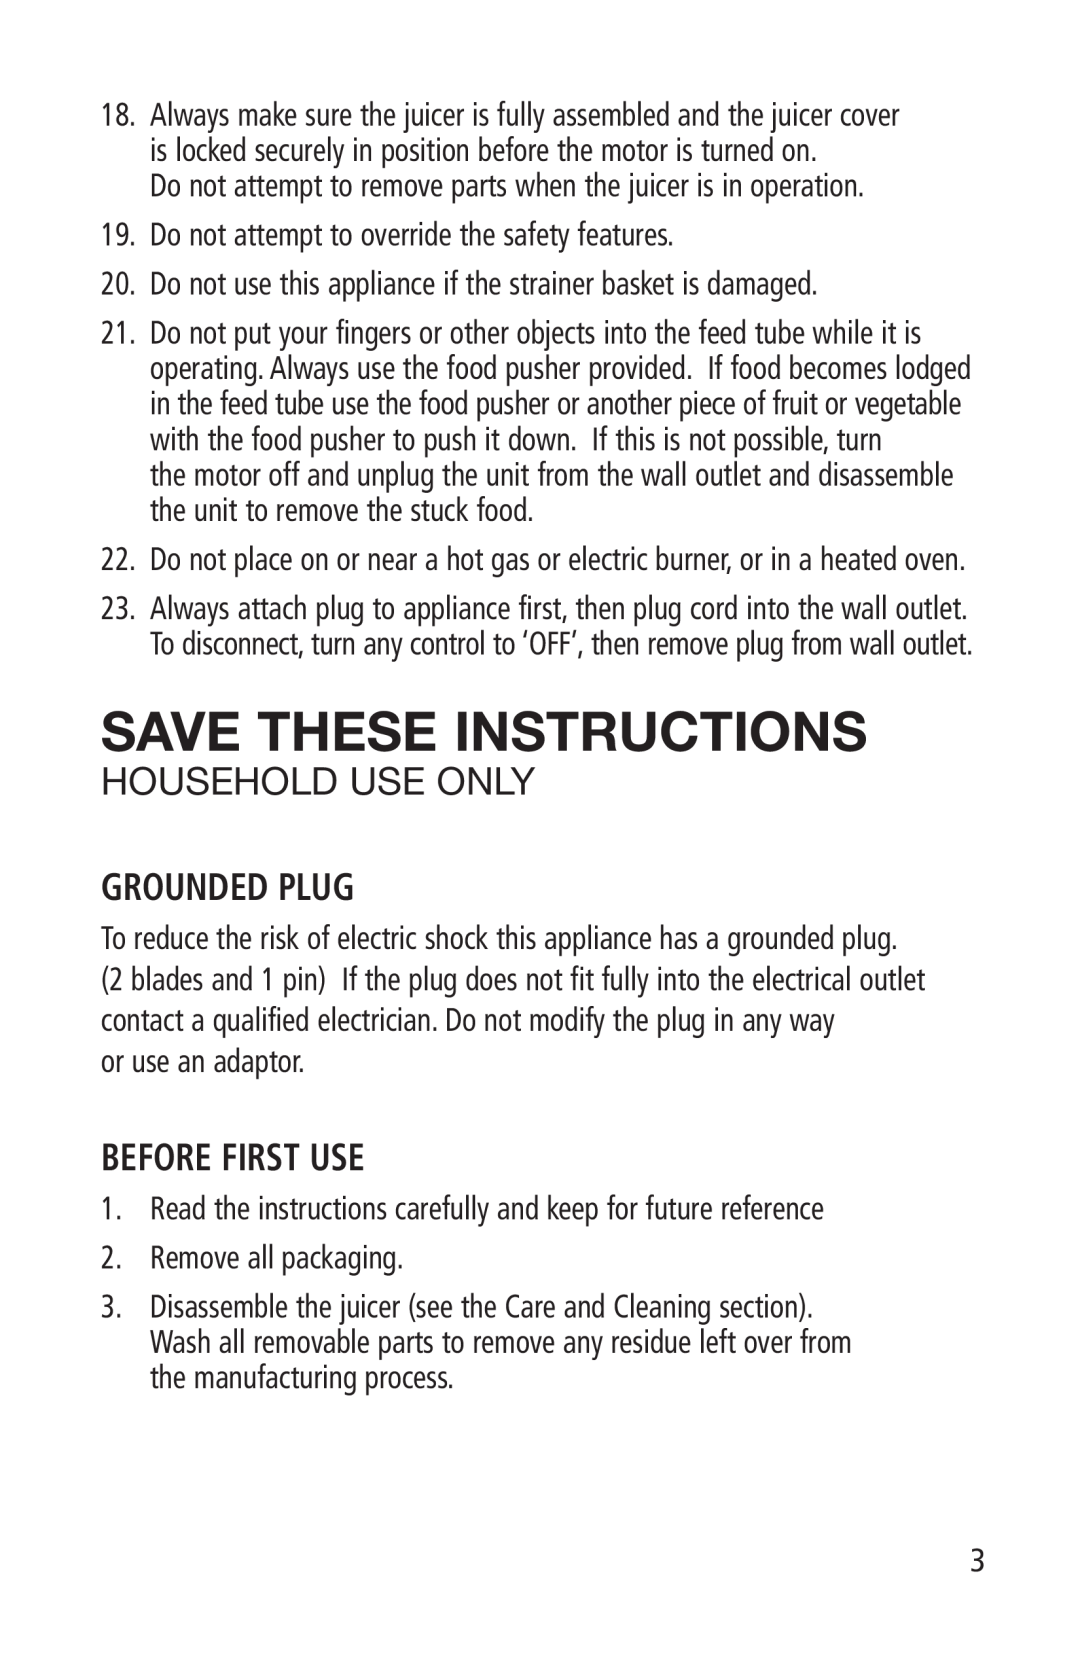 Salton JE-1013 manual Save These Instructions, Grounded Plug, Before First Use, Household Use Only 